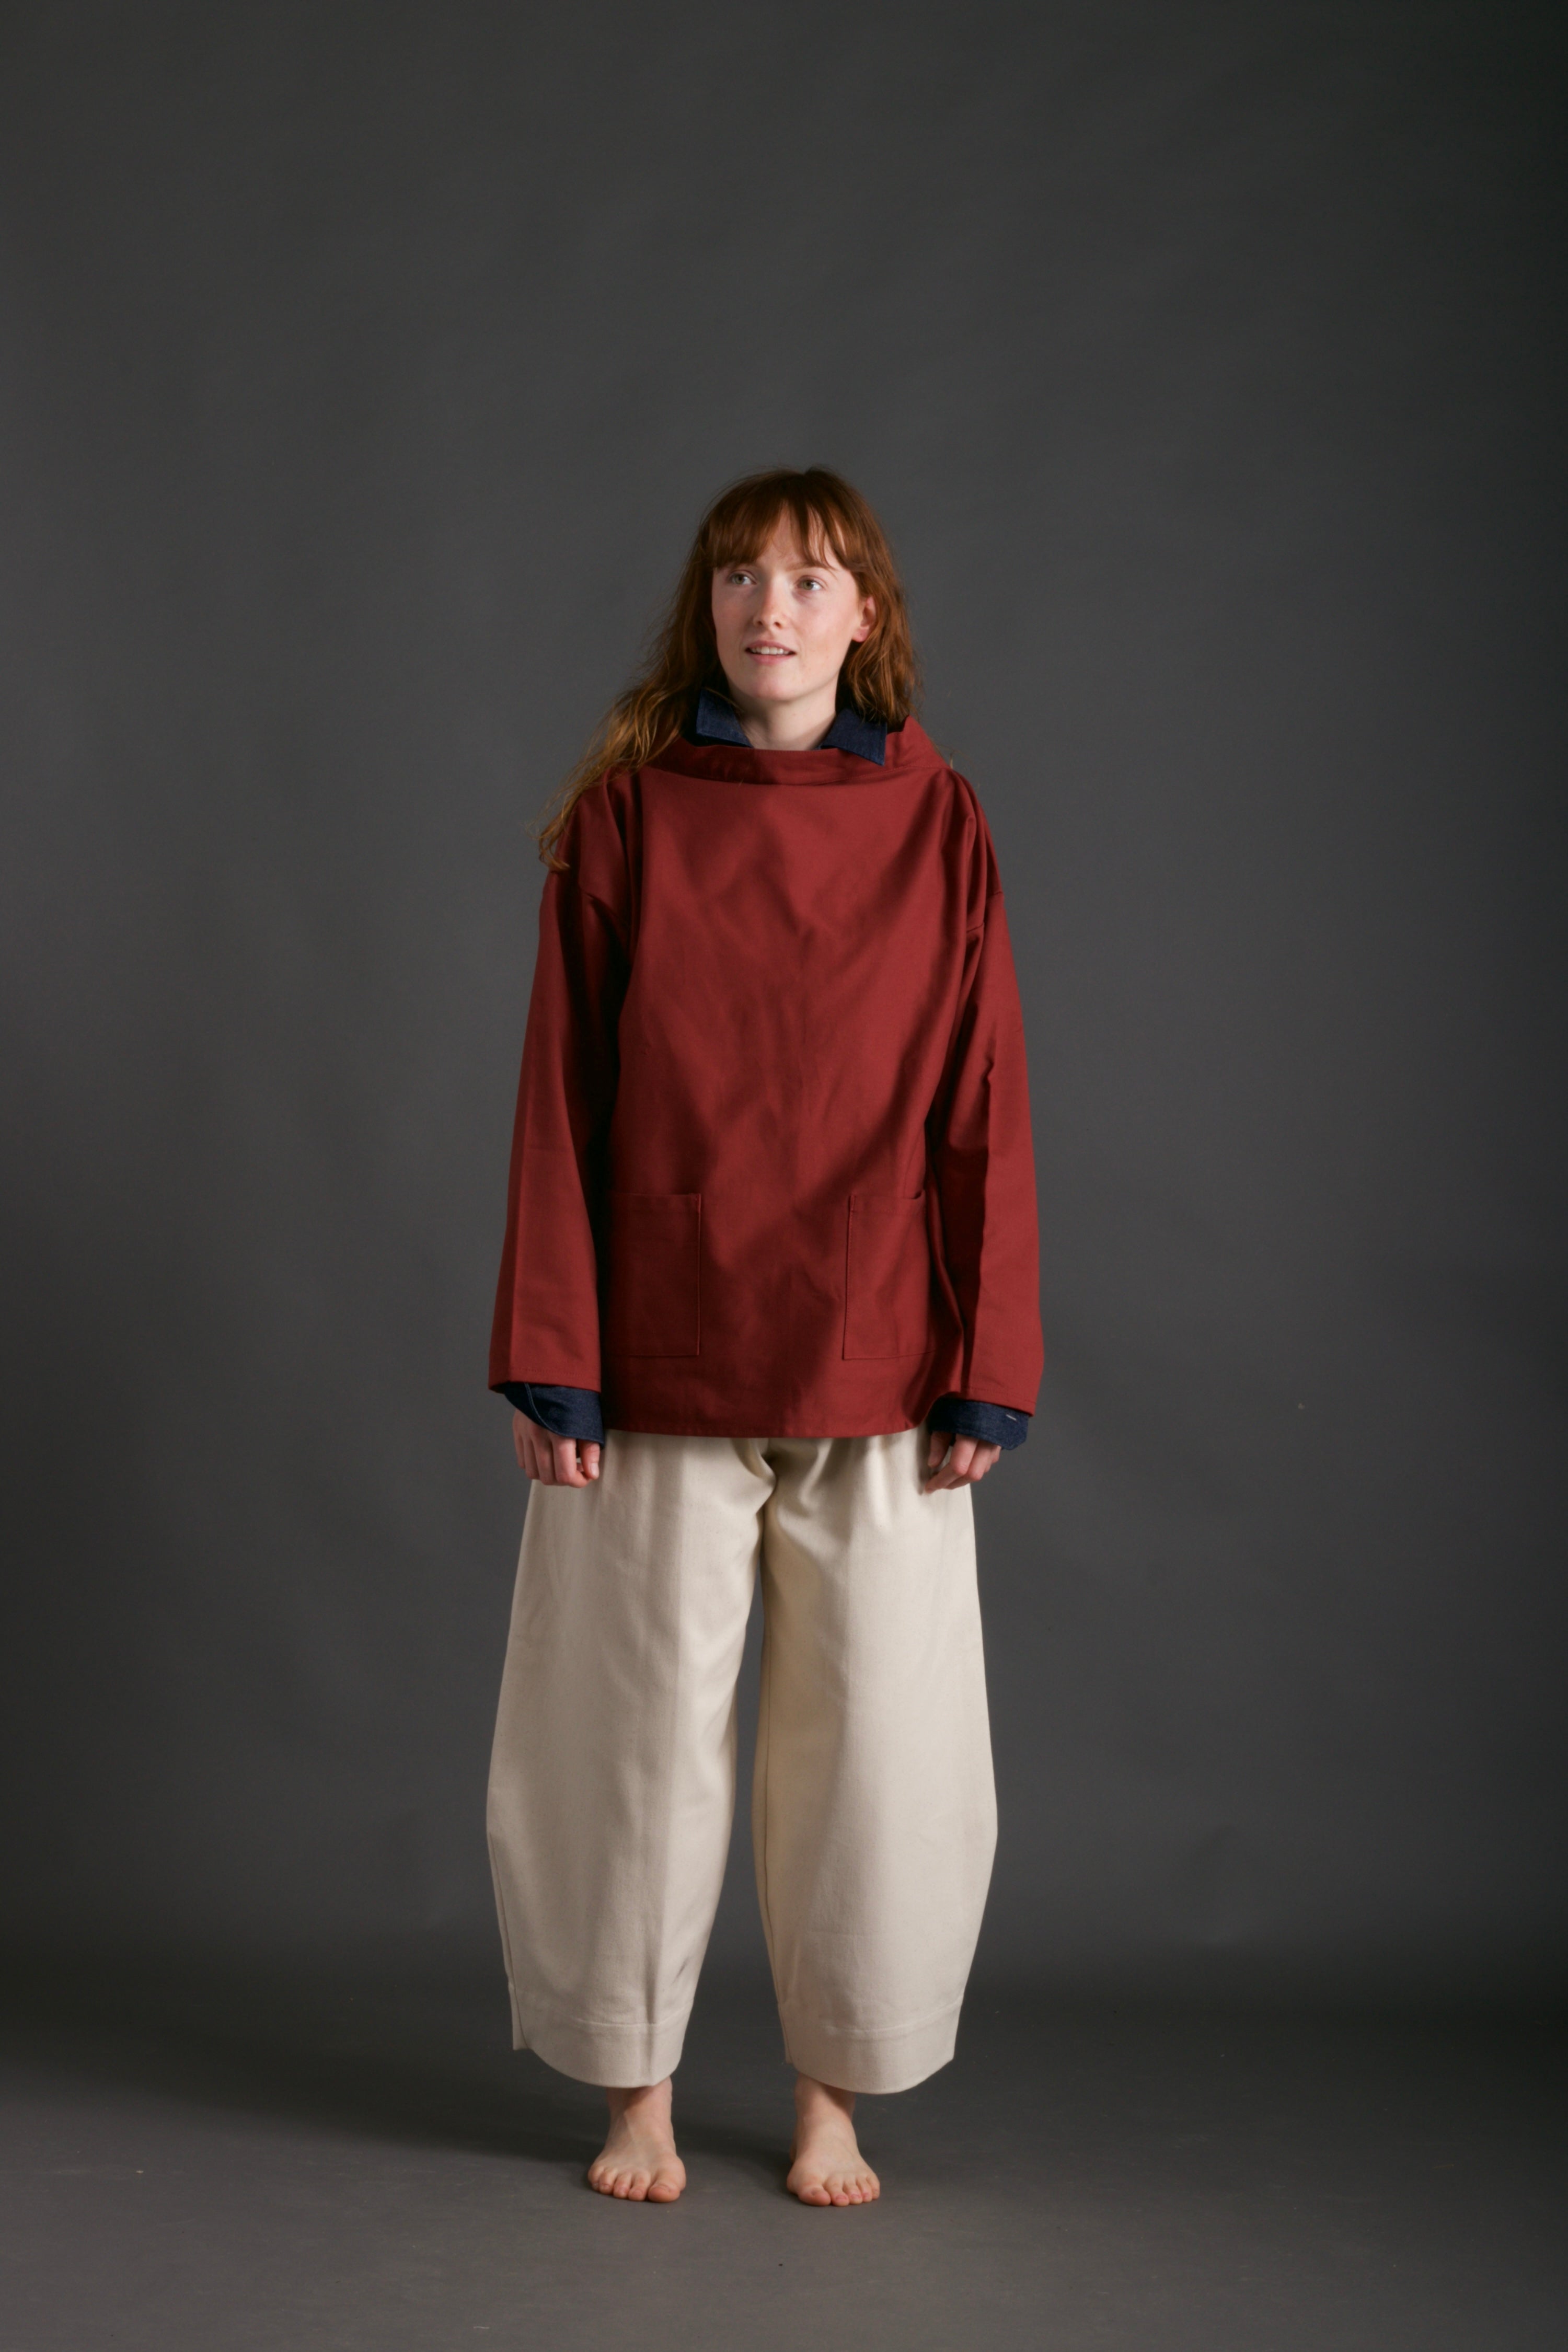 Woman wearsCarrier Company Traditional Norfolk Slop in Breton Red with Dutch Trouser in Seeded Denim